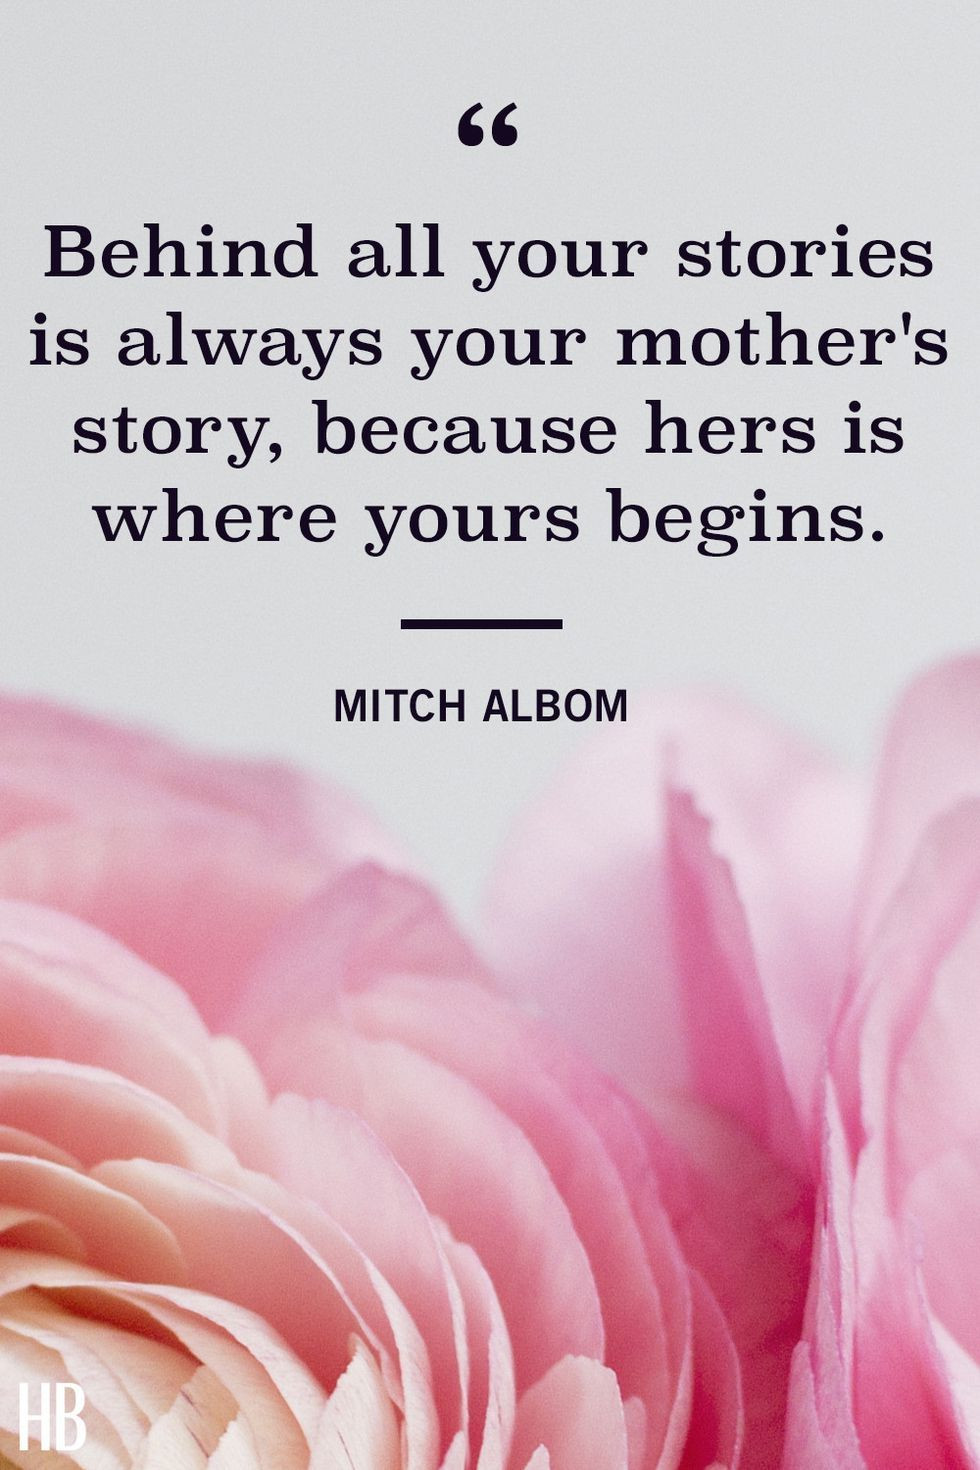 Mothers Day Pictures And Quotes
 25 Mother s Day Quotes That Will Make You Want to Call